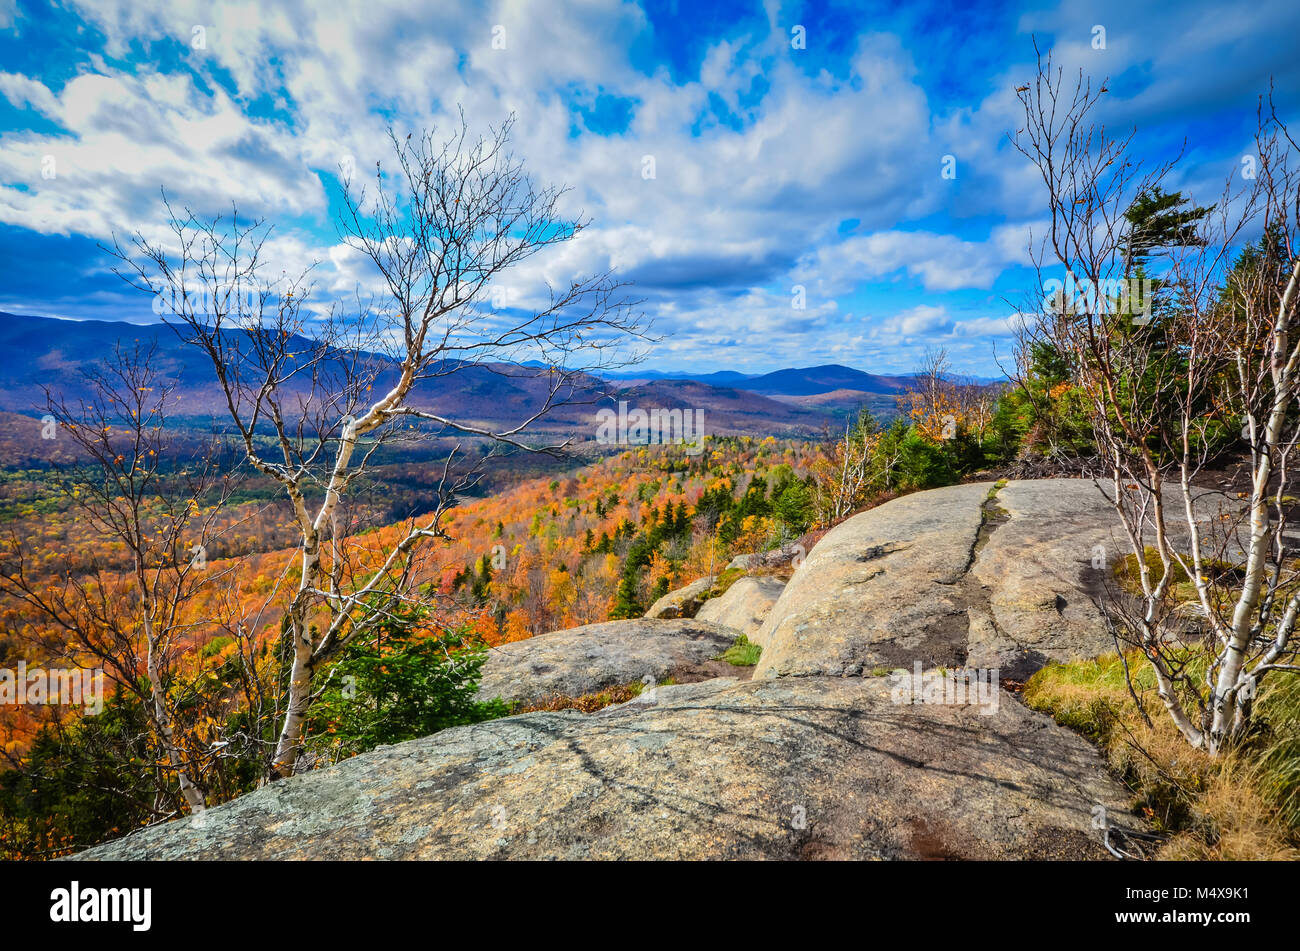 Scenic overlook on granite boulders with view of Adirondack Mountains. Stock Photo